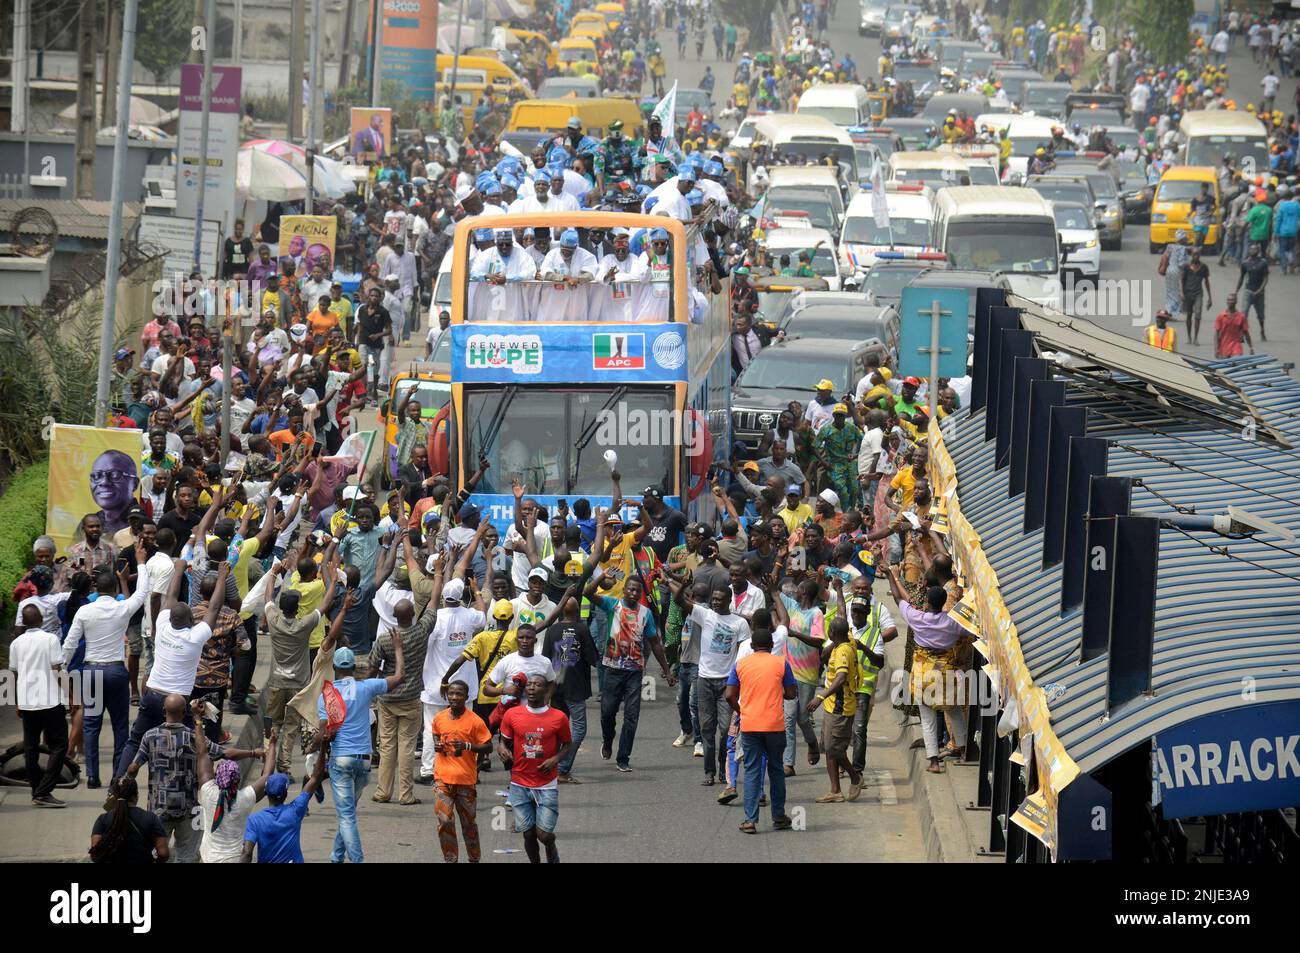 Lagos, Nigeria February 21, 2023 Party supporters crowd a bus as Asiwaju Bola Ahmed Tinubu, Presidential candidate, All Progressives Congress (APC) for 2023 Elections holds grand finale of his campaign at the Teslim Balogun Stadium in Surulere, Lagos on Tuesday, February 21, 2023. Photo by Adekunle Ajayi Stock Photo